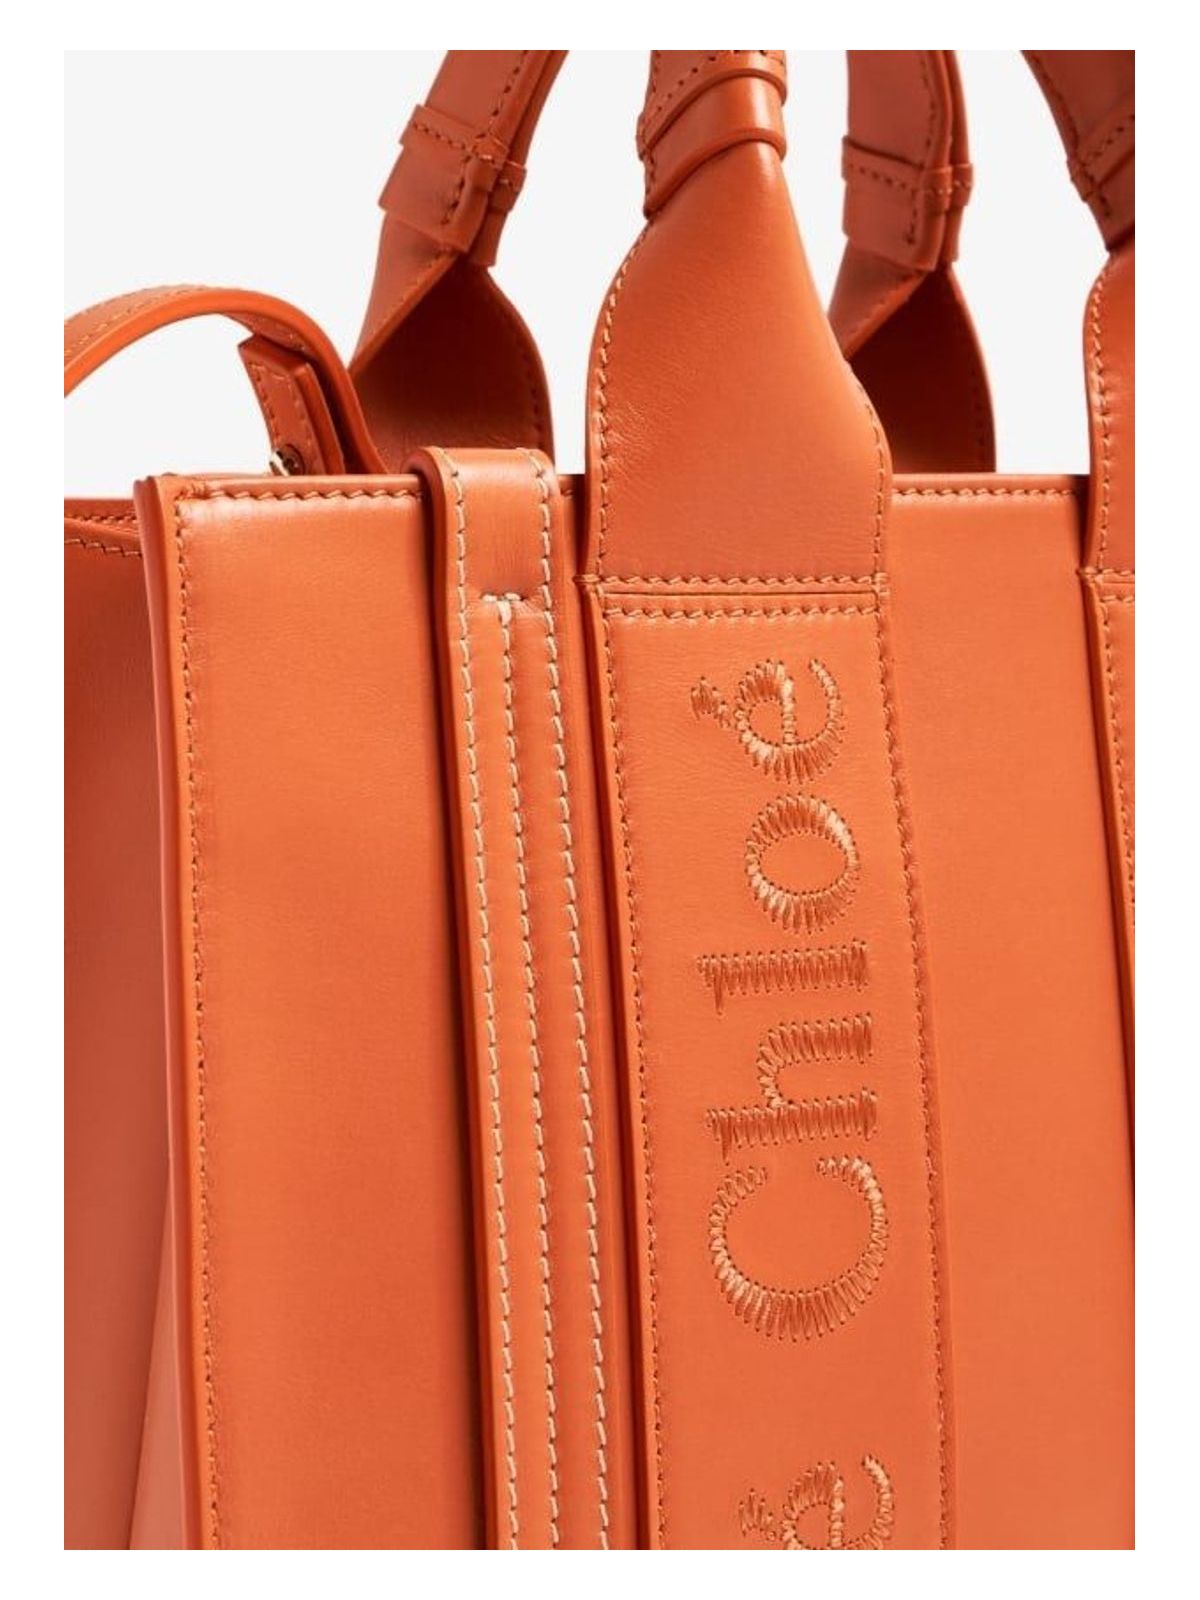 WOODY848 CHLOÉ WOODY SMALL LEATHER TOTE